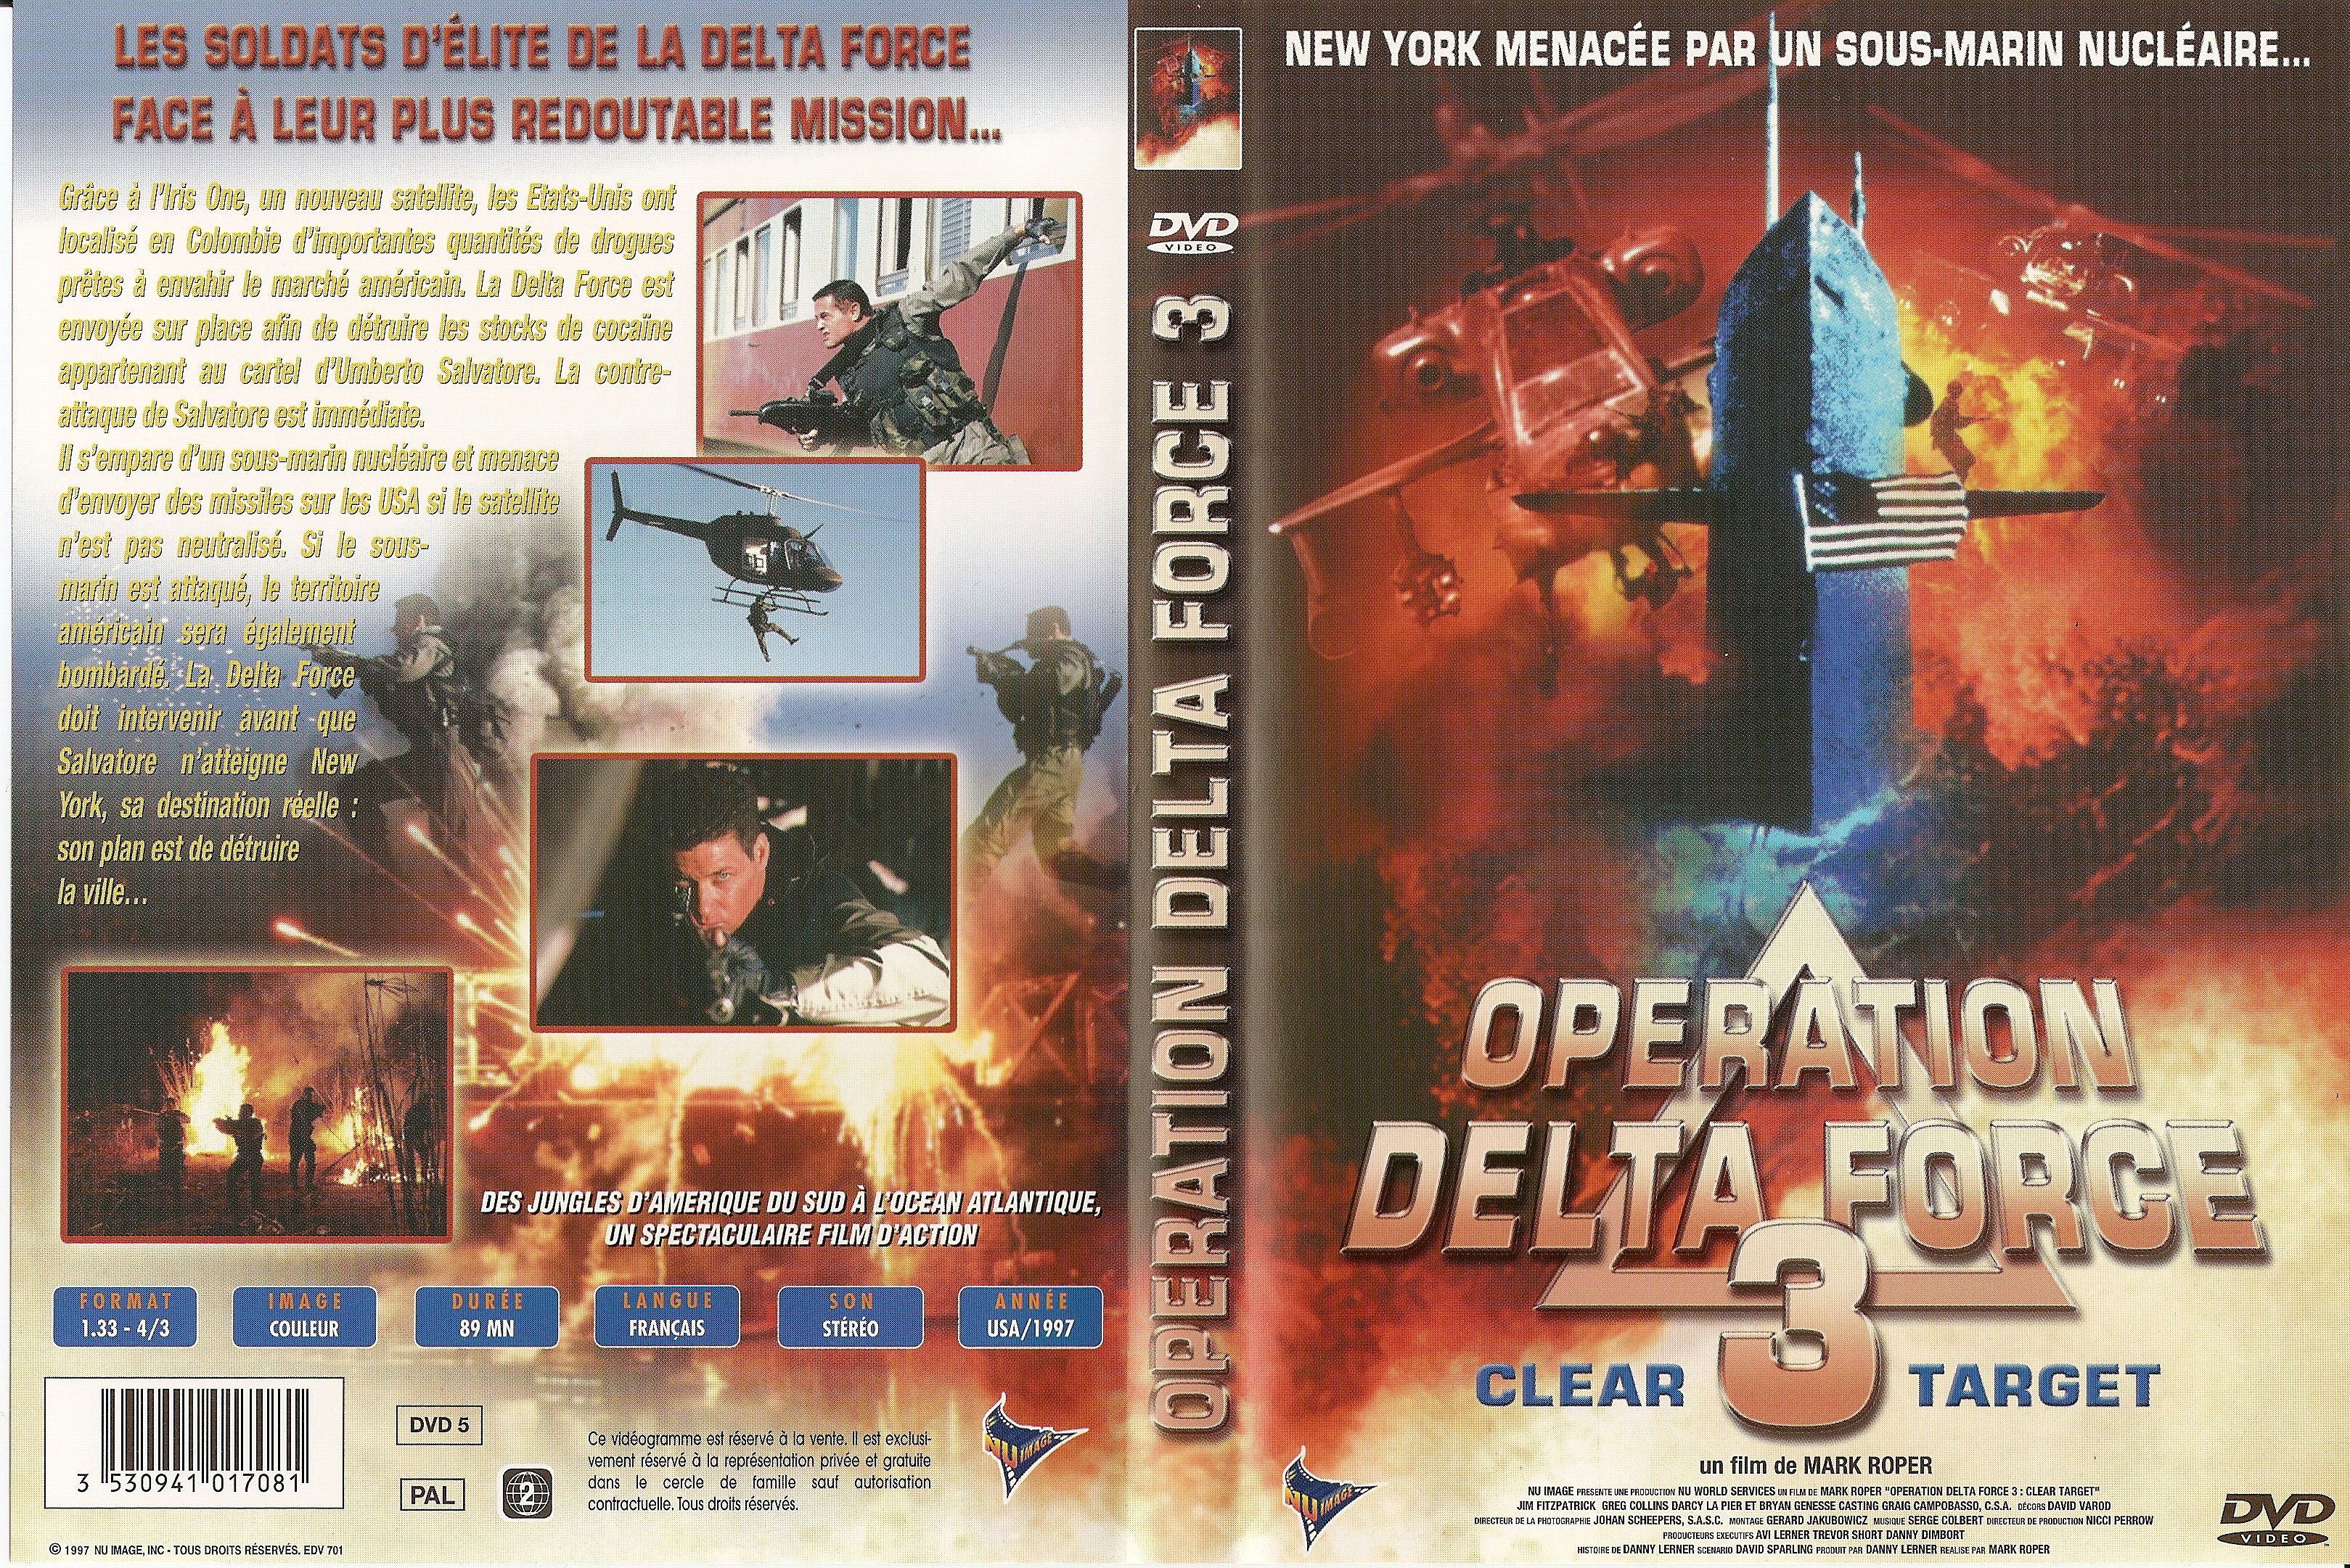 Jaquette DVD Operation delta force 3